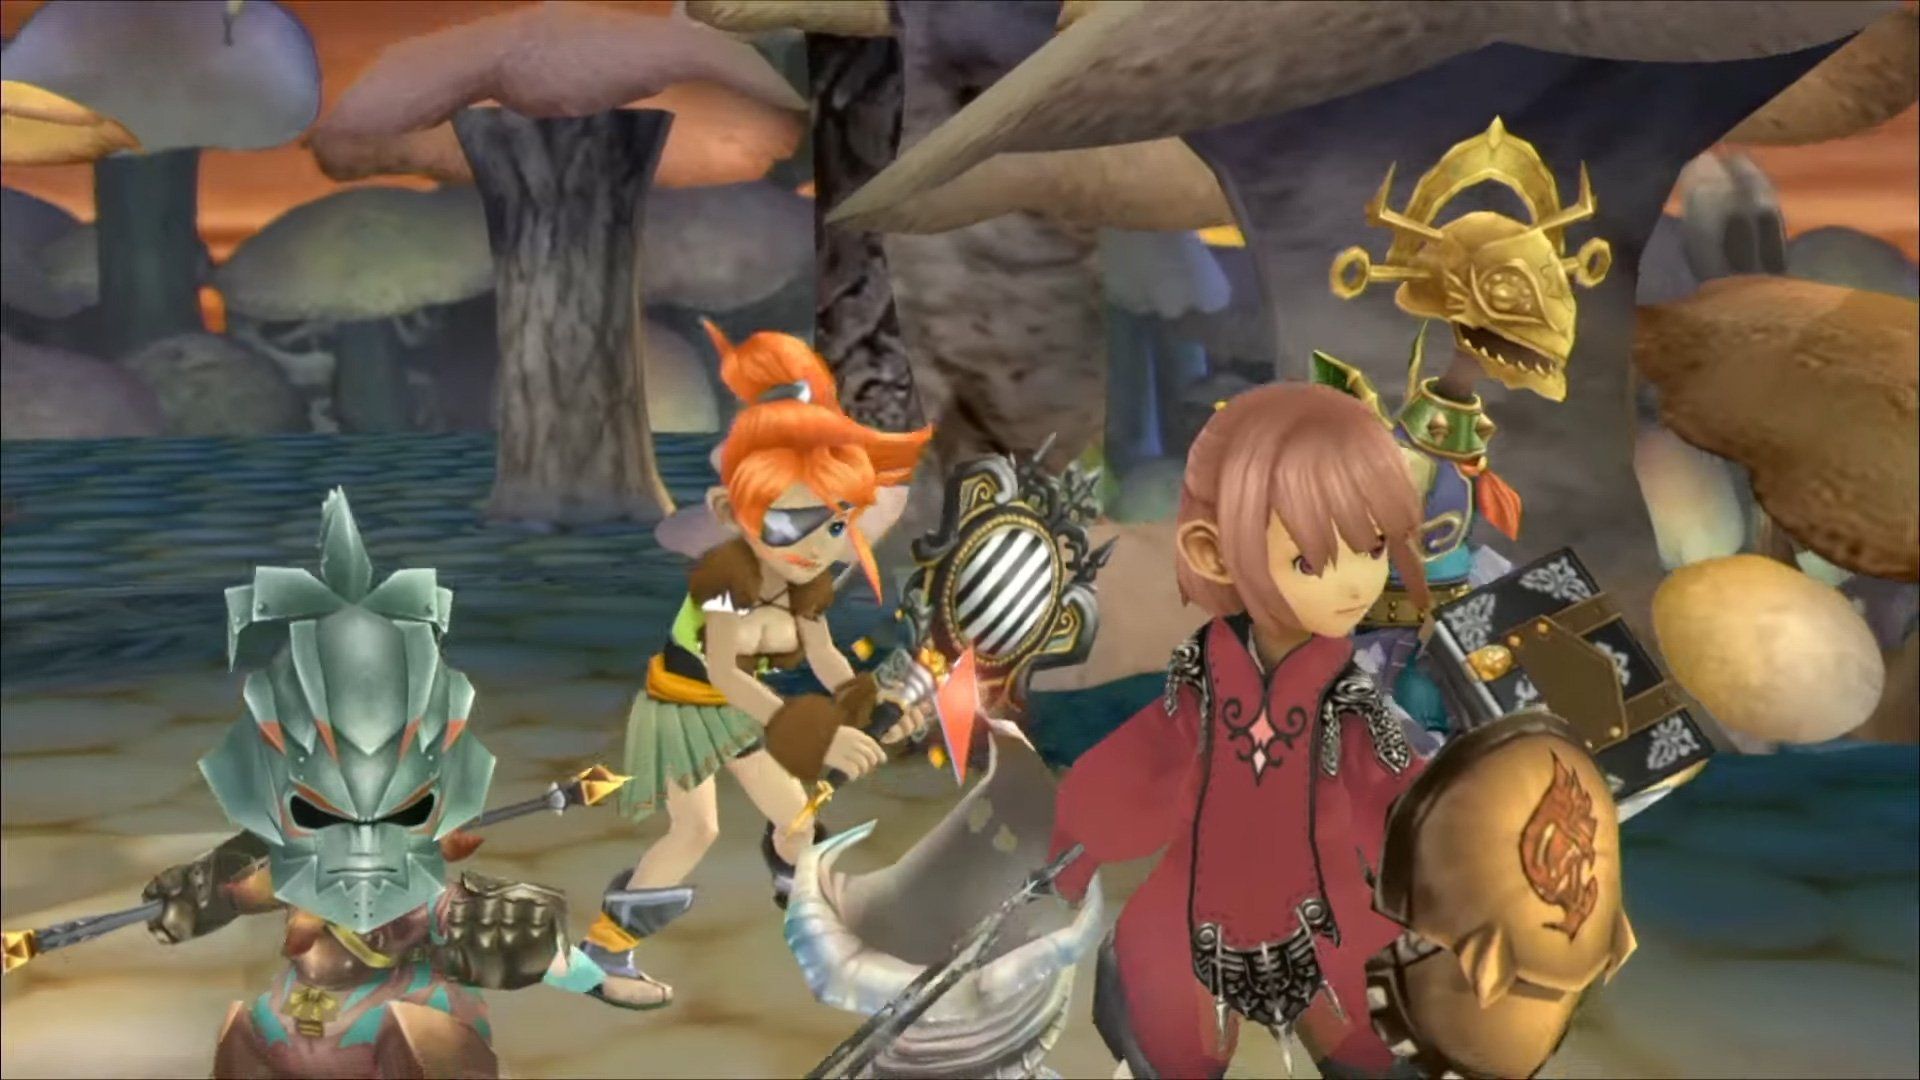 Final Fantasy Crystal Chronicles Remastered Edition releases digitally on August 27